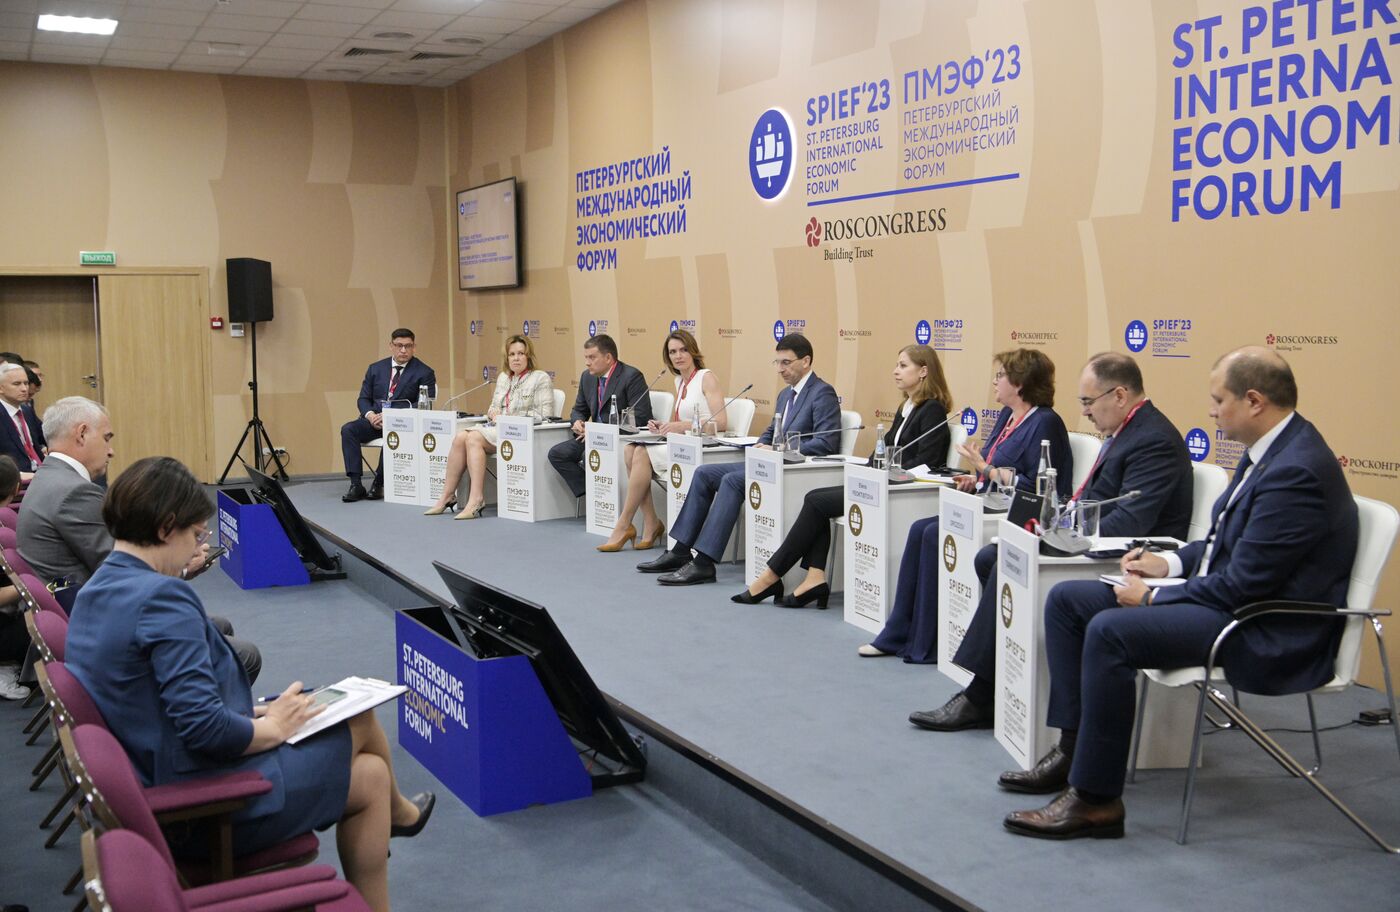 SPIEF-2023. Where There Are People, There Is Business: Strategic Motivation for Private Investment in Demography